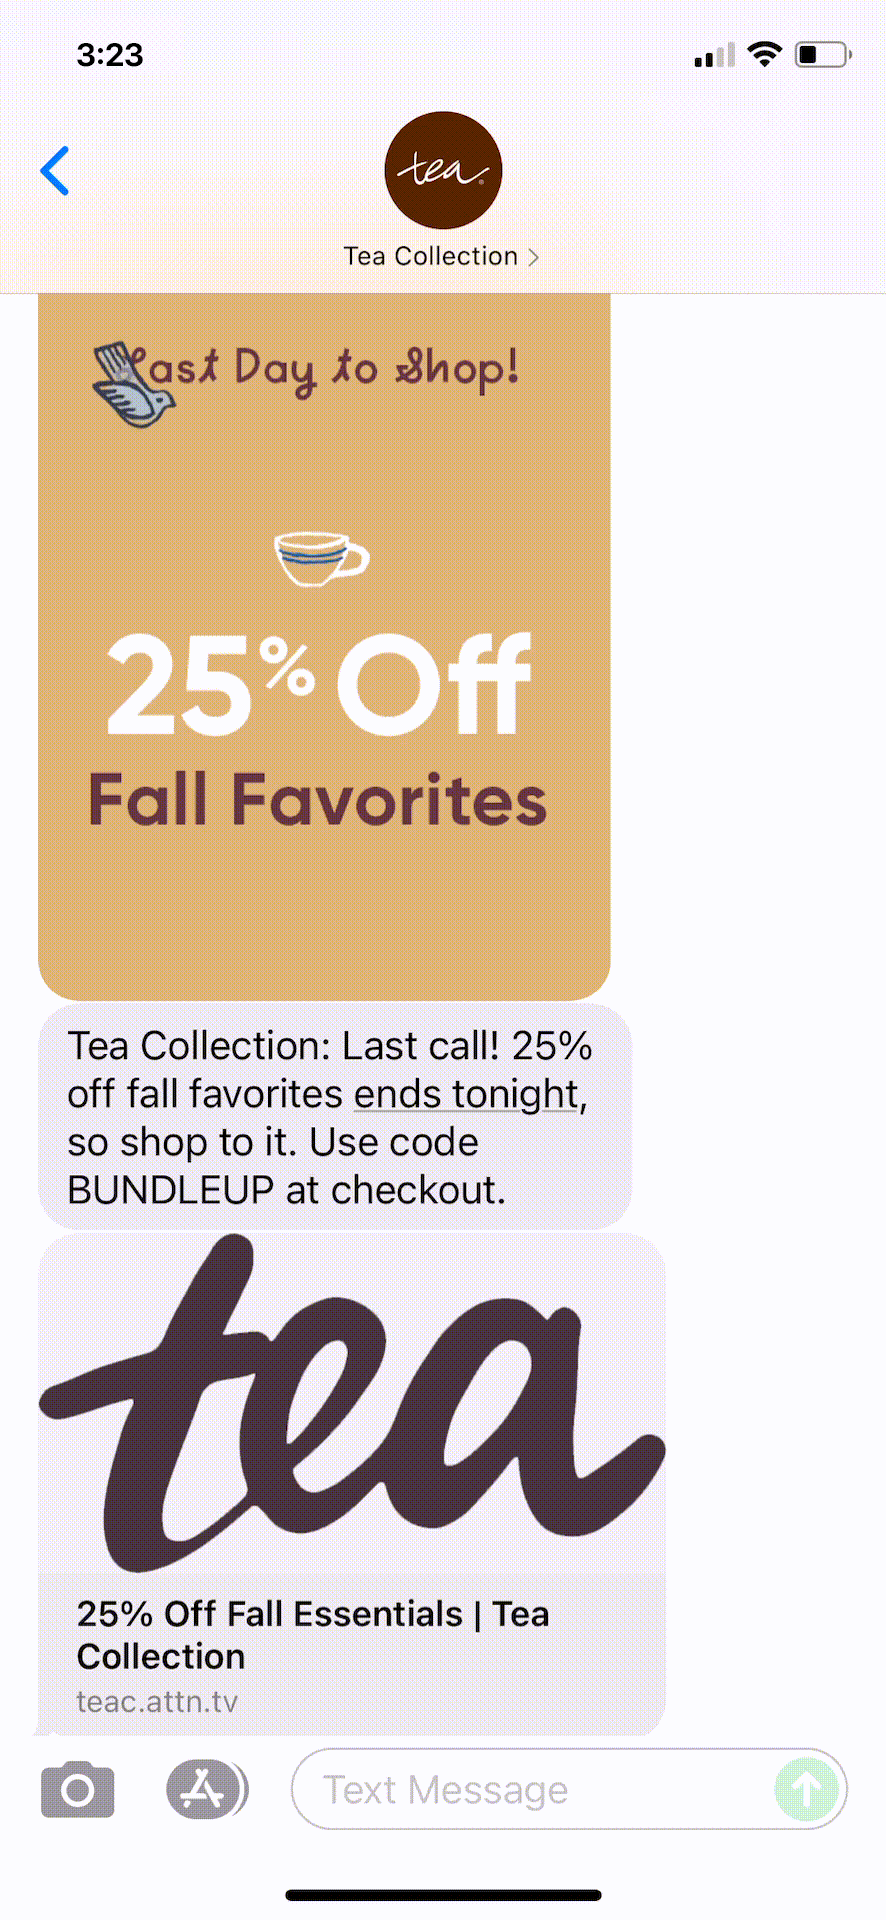 Tea-Collection-Text-Message-Marketing-Example-10.12.2021